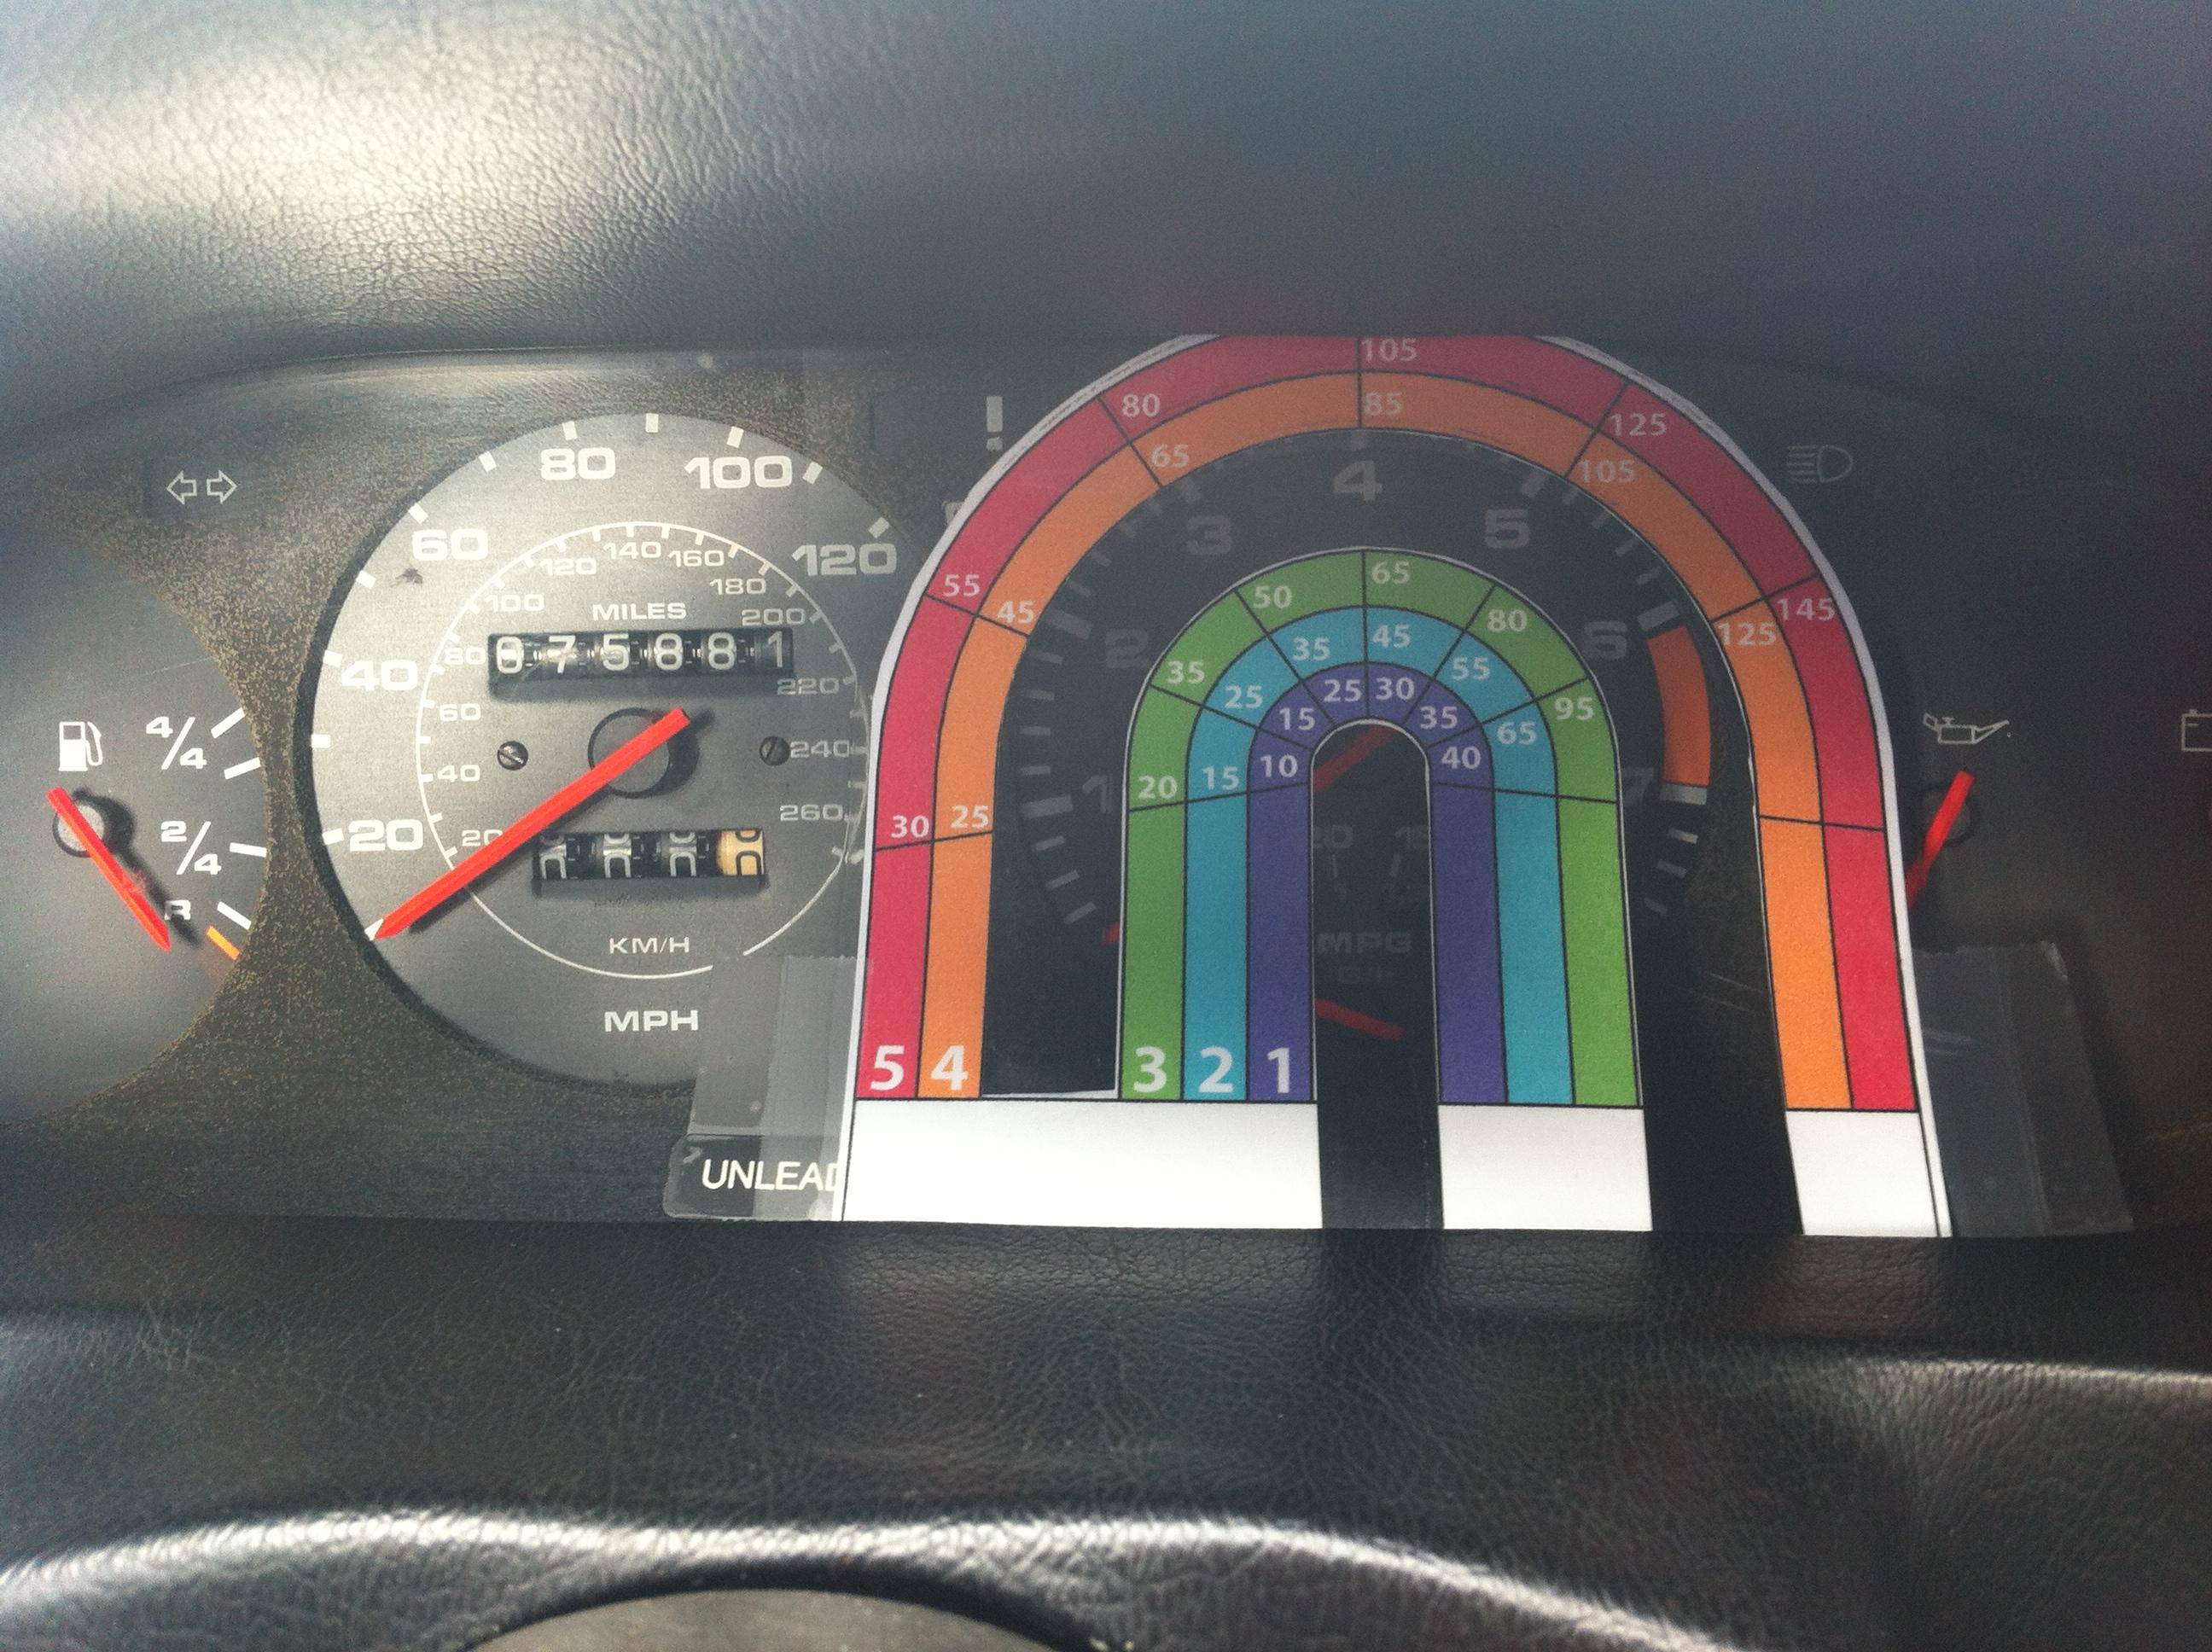 Speedometer busted? Print out this overlay for your tachometer.